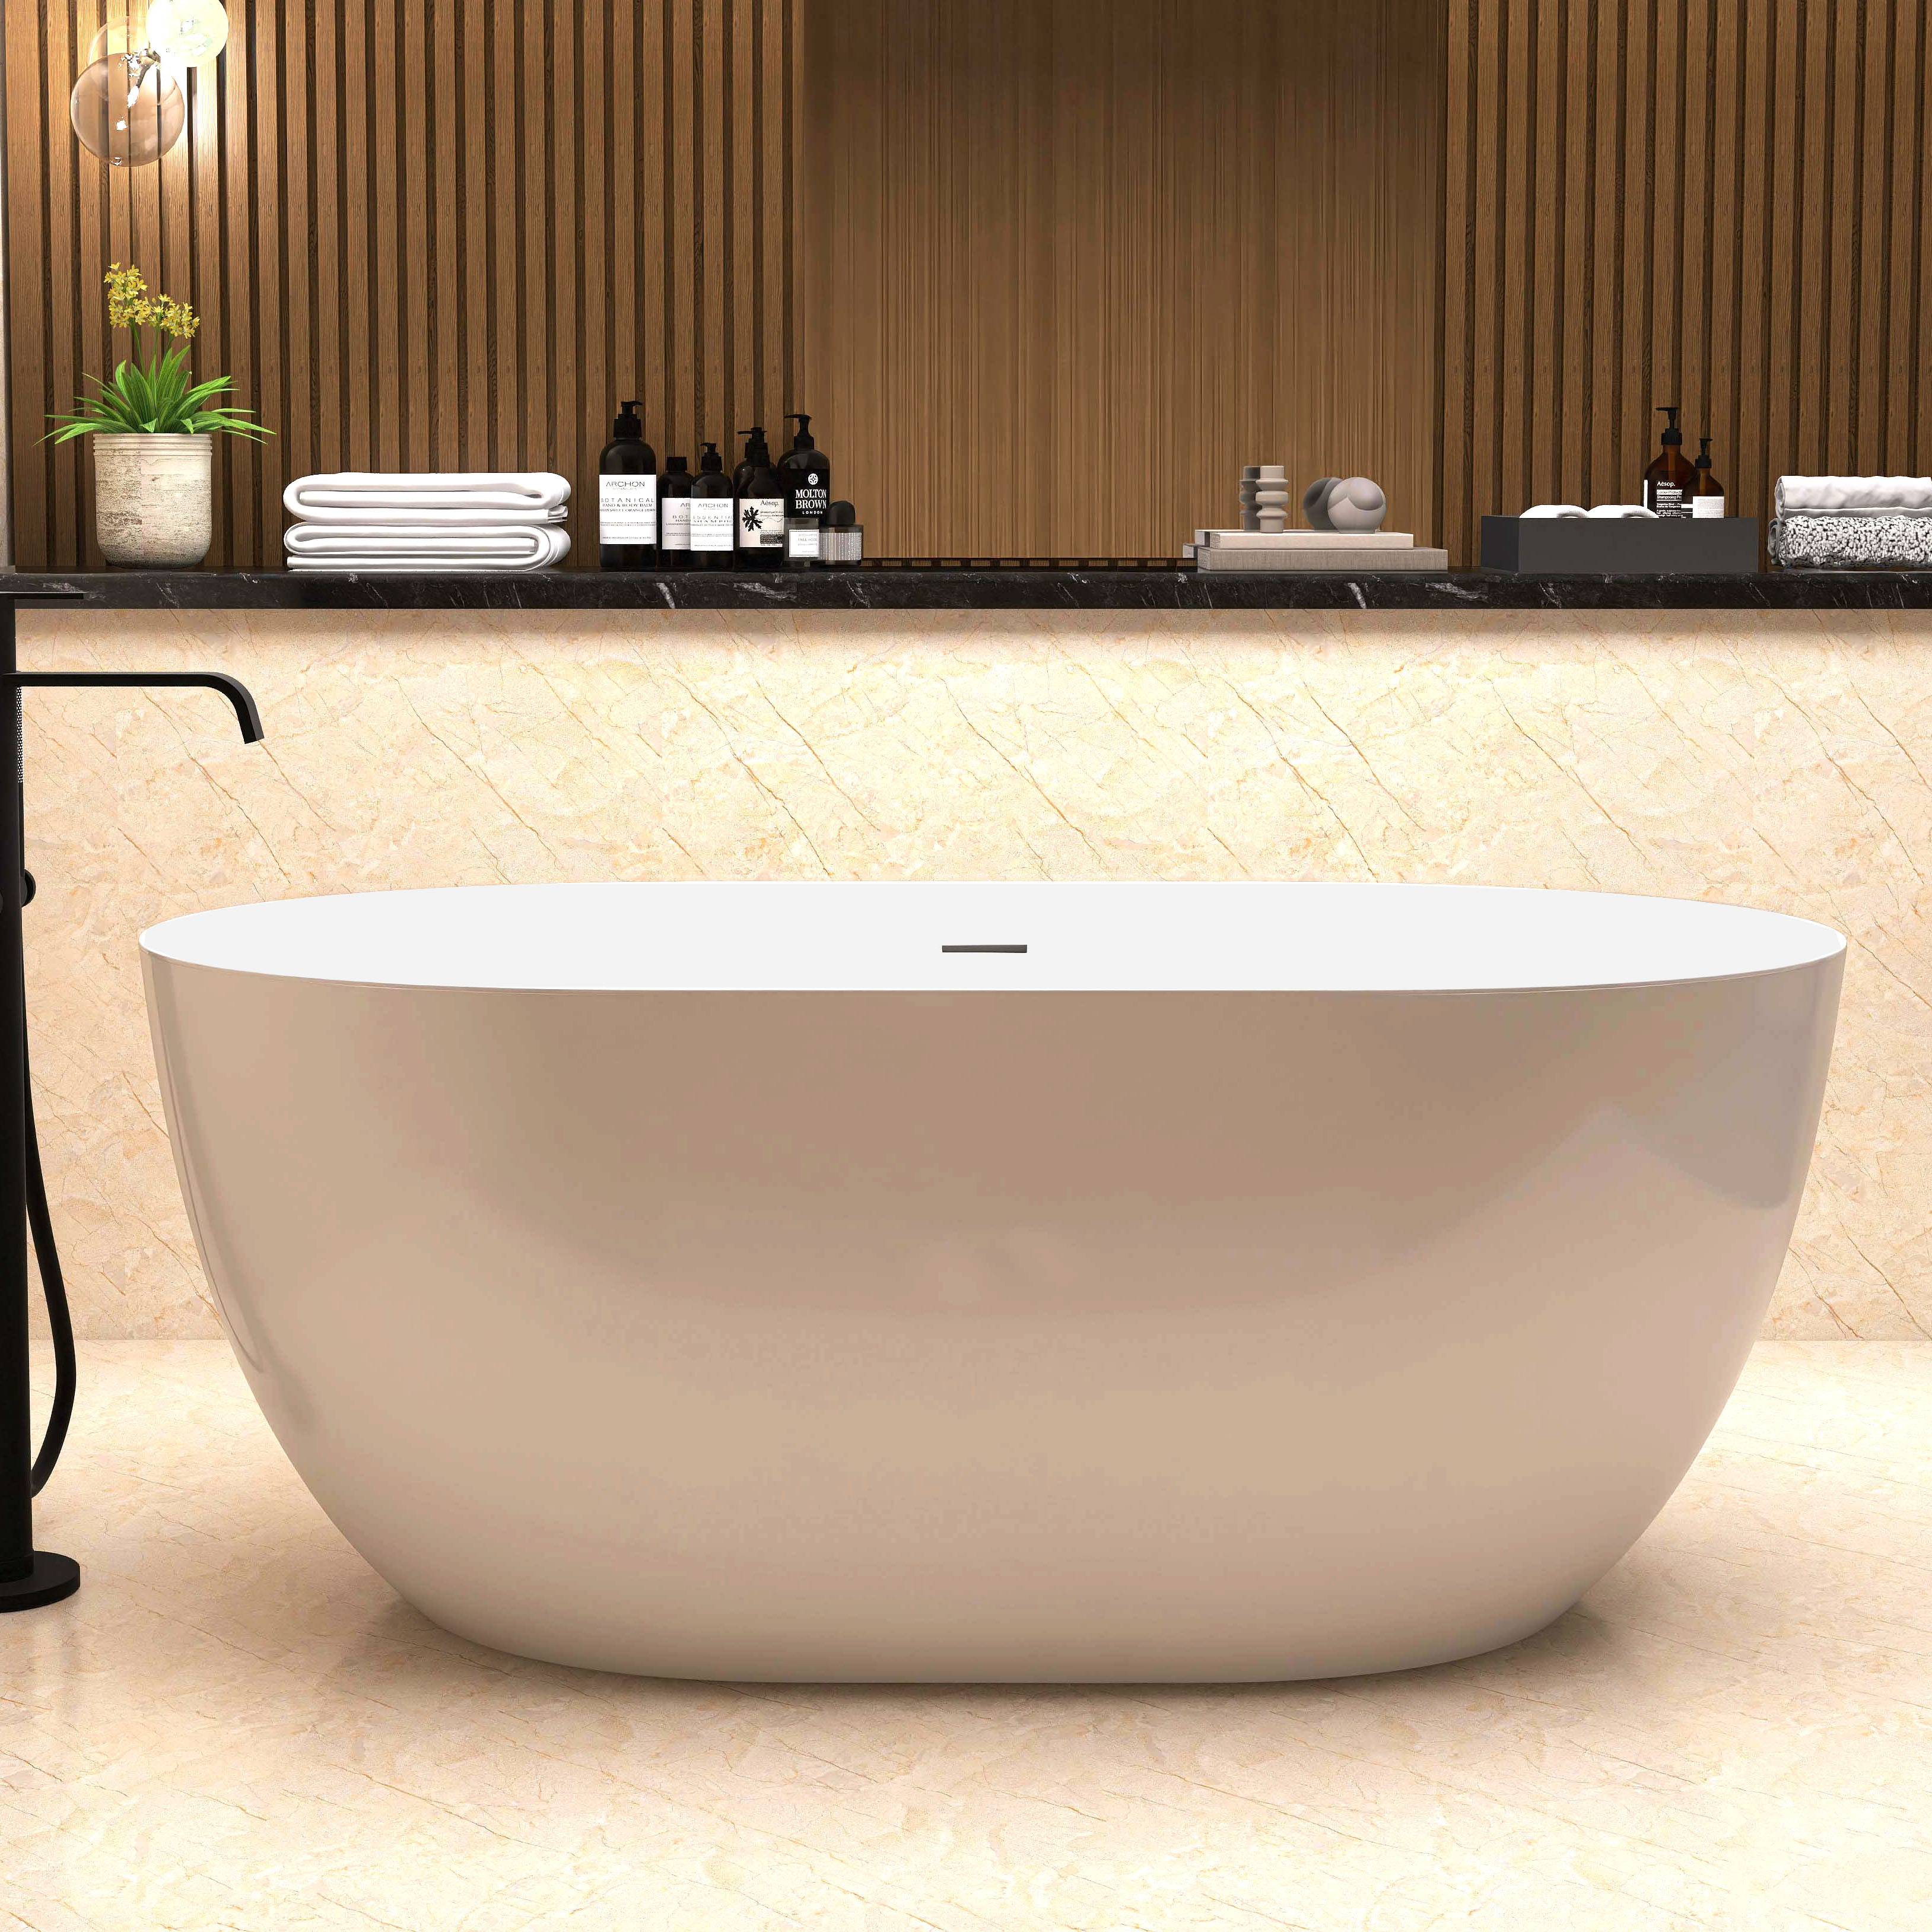 59" Acrylic Free Standing Tub - Classic Oval Shape Soaking Tub, Adjustable Freestanding Bathtub with Integrated Slotted Overflow and Chrome Pop-up Drain Anti-clogging Gloss White-CASAINC